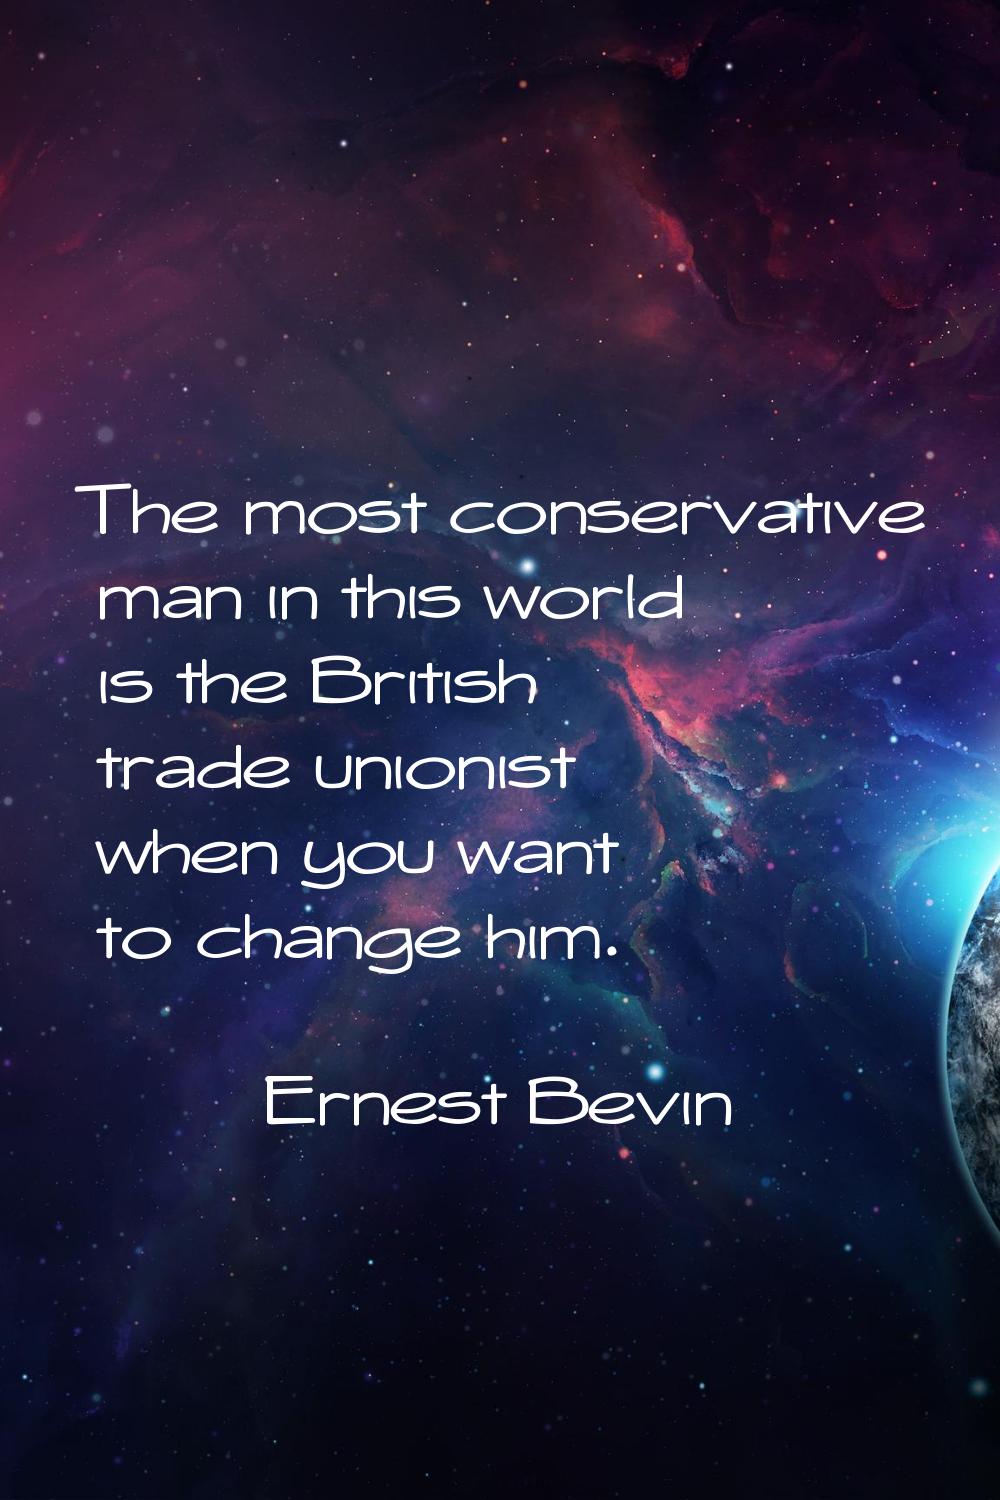 The most conservative man in this world is the British trade unionist when you want to change him.